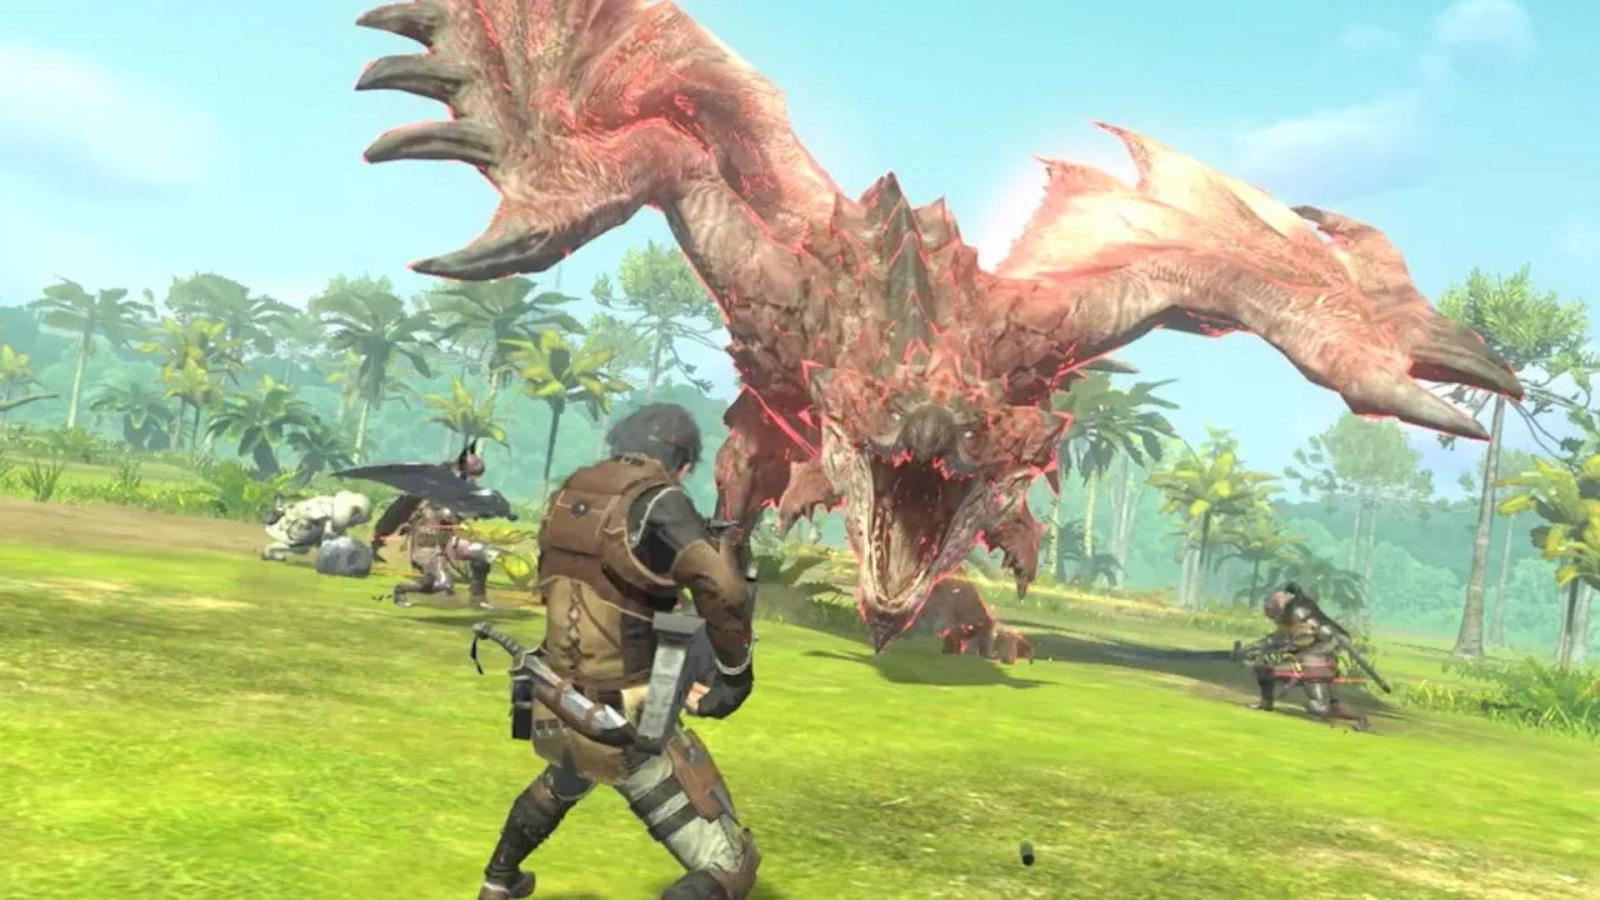 Hunter fighting a Rathalos in Monster Hunter Now